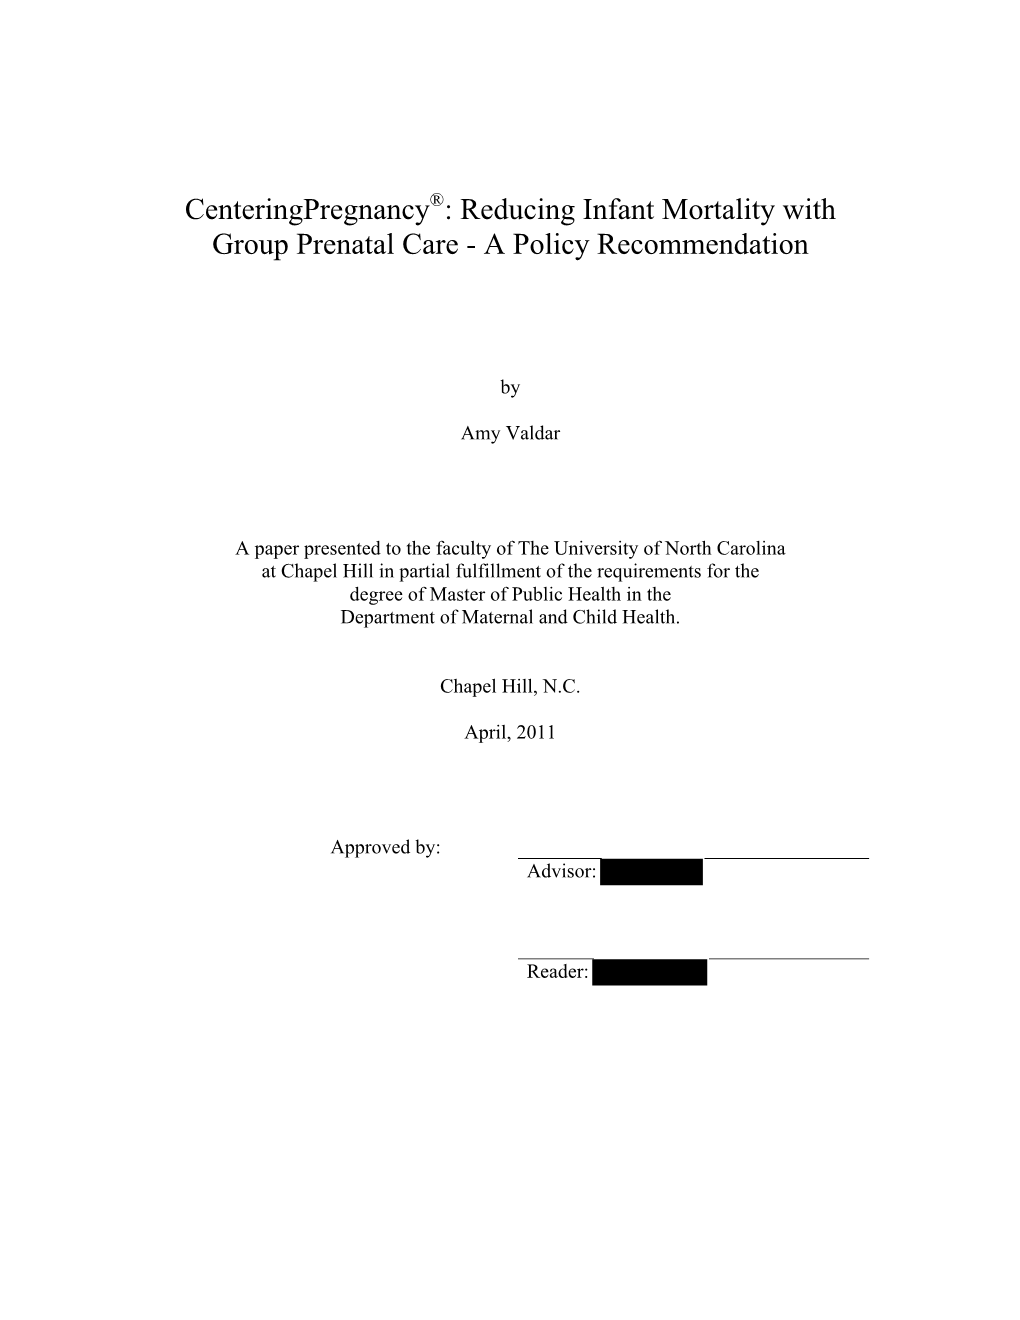 Centeringpregnancy®: Reducing Infant Mortality with Group Prenatal Care - a Policy Recommendation